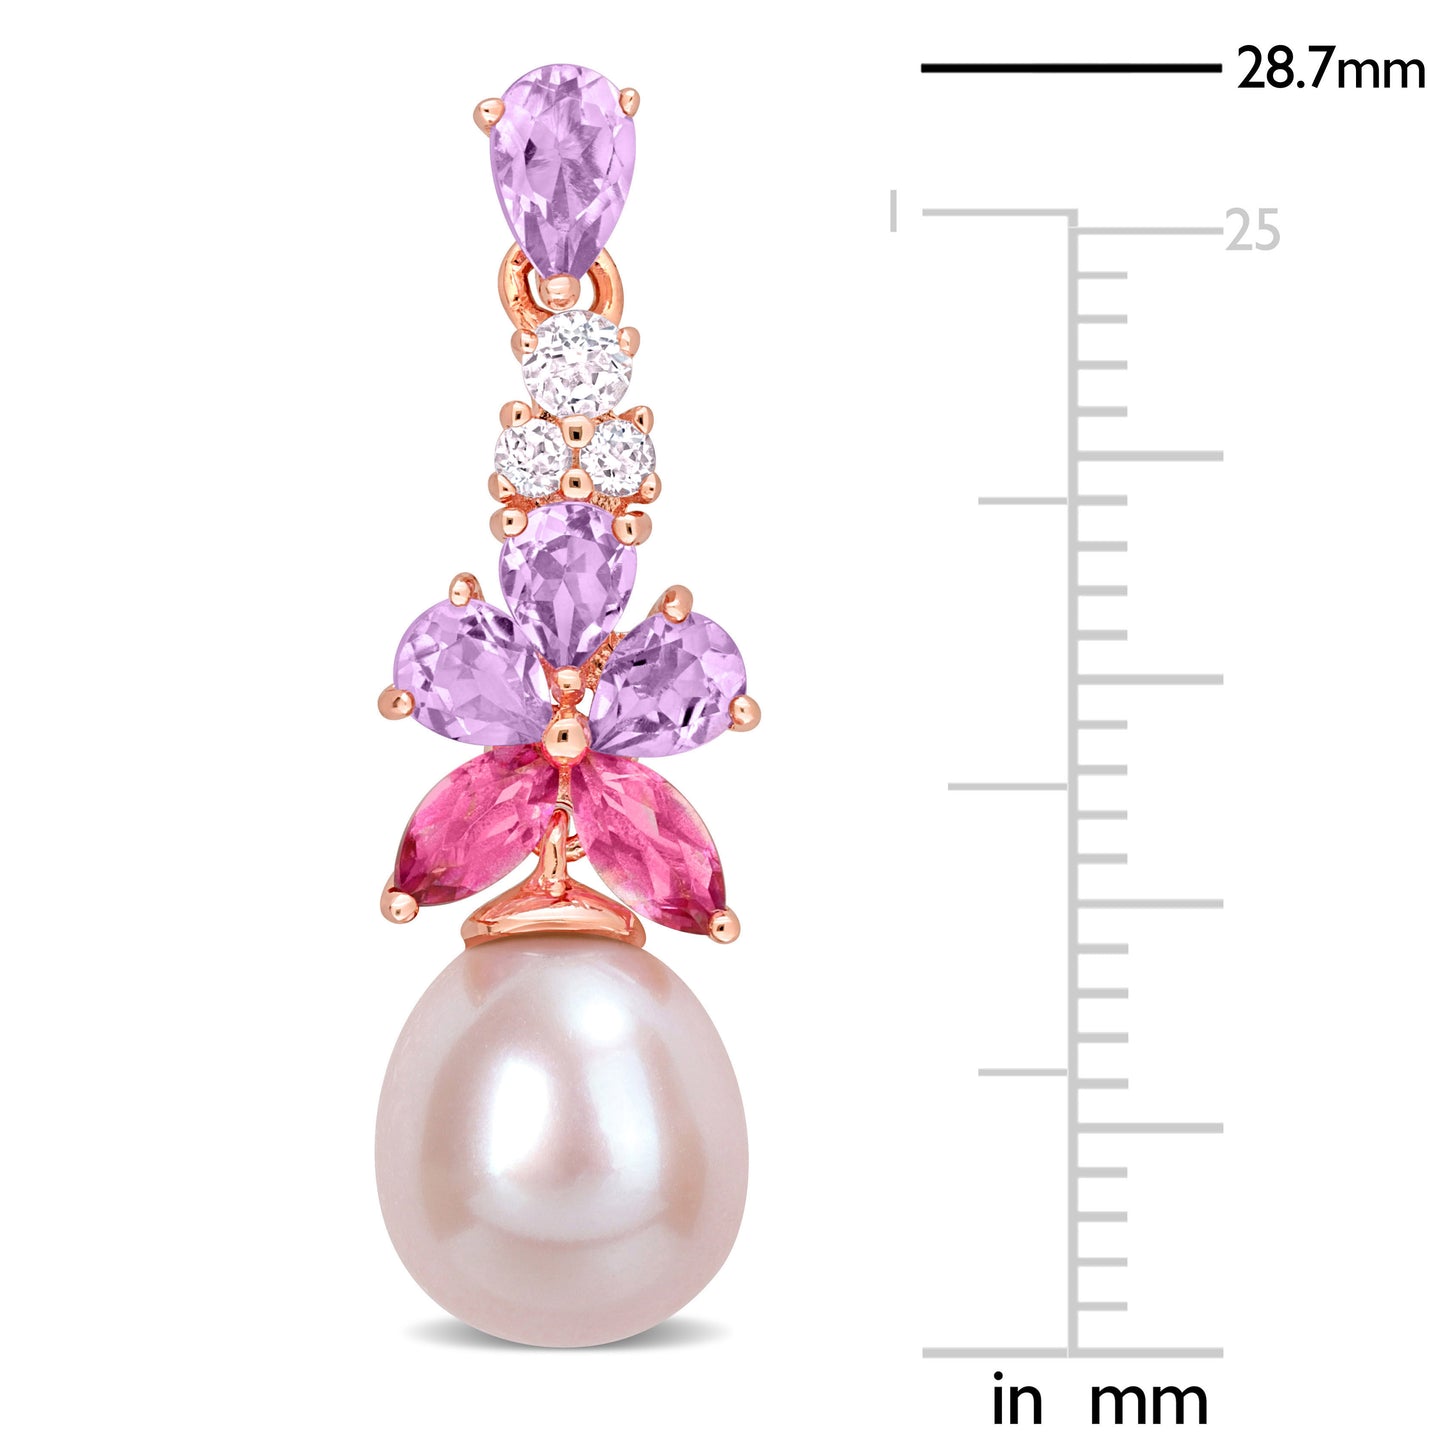 2 3/8 CT TGW Rose de France White Topaz Pink Topaz And 8.5 - 9 MM Pink Freshwater Cultured Pearl Fashion Post Earrings Pink Silver 18KP Micron Plated